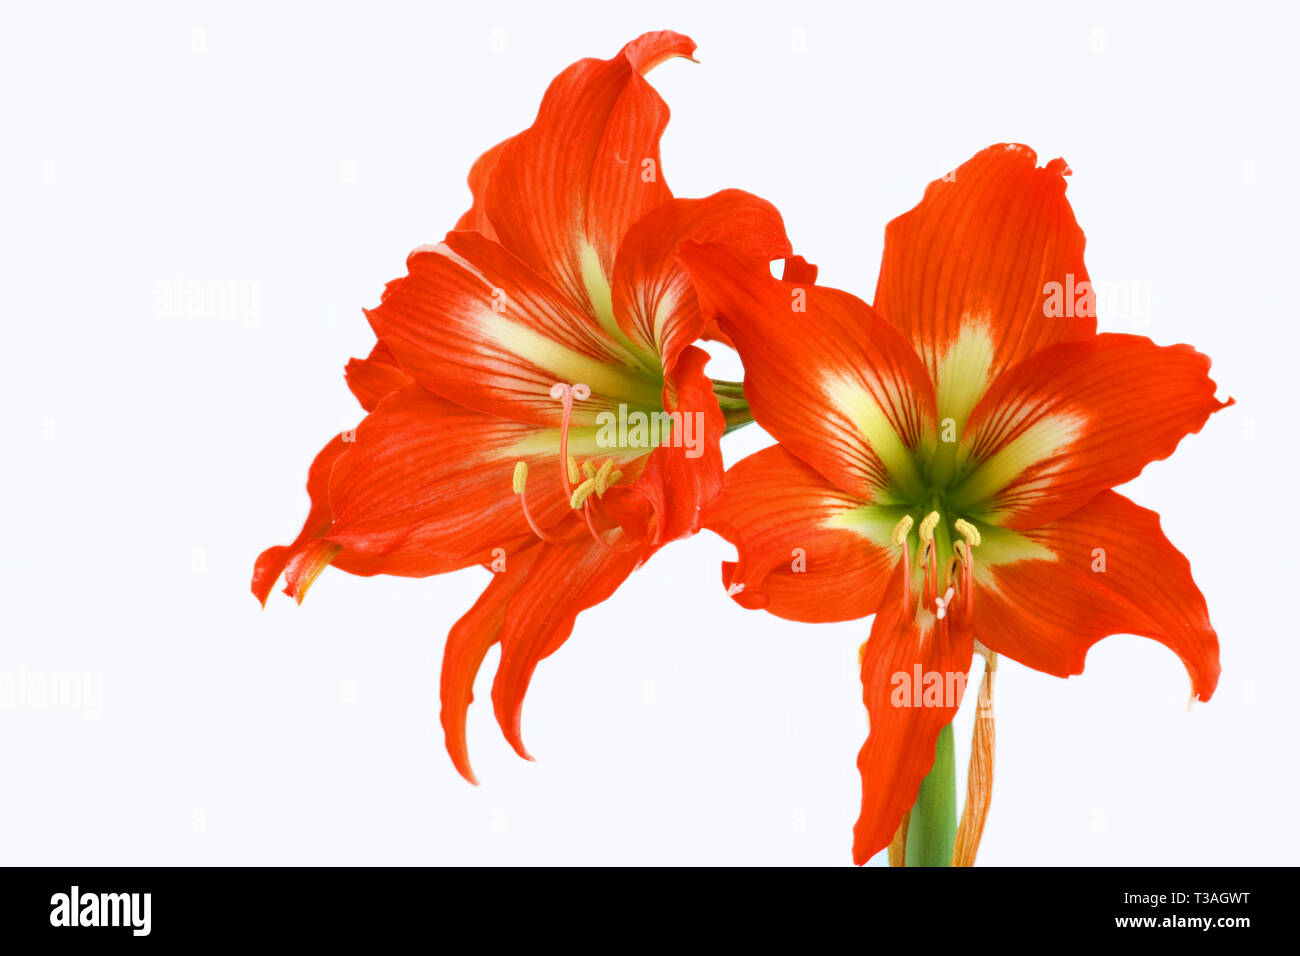 Hippeastrum Amaryllis red over a white background, beautiful blossom flower. Stock Photo